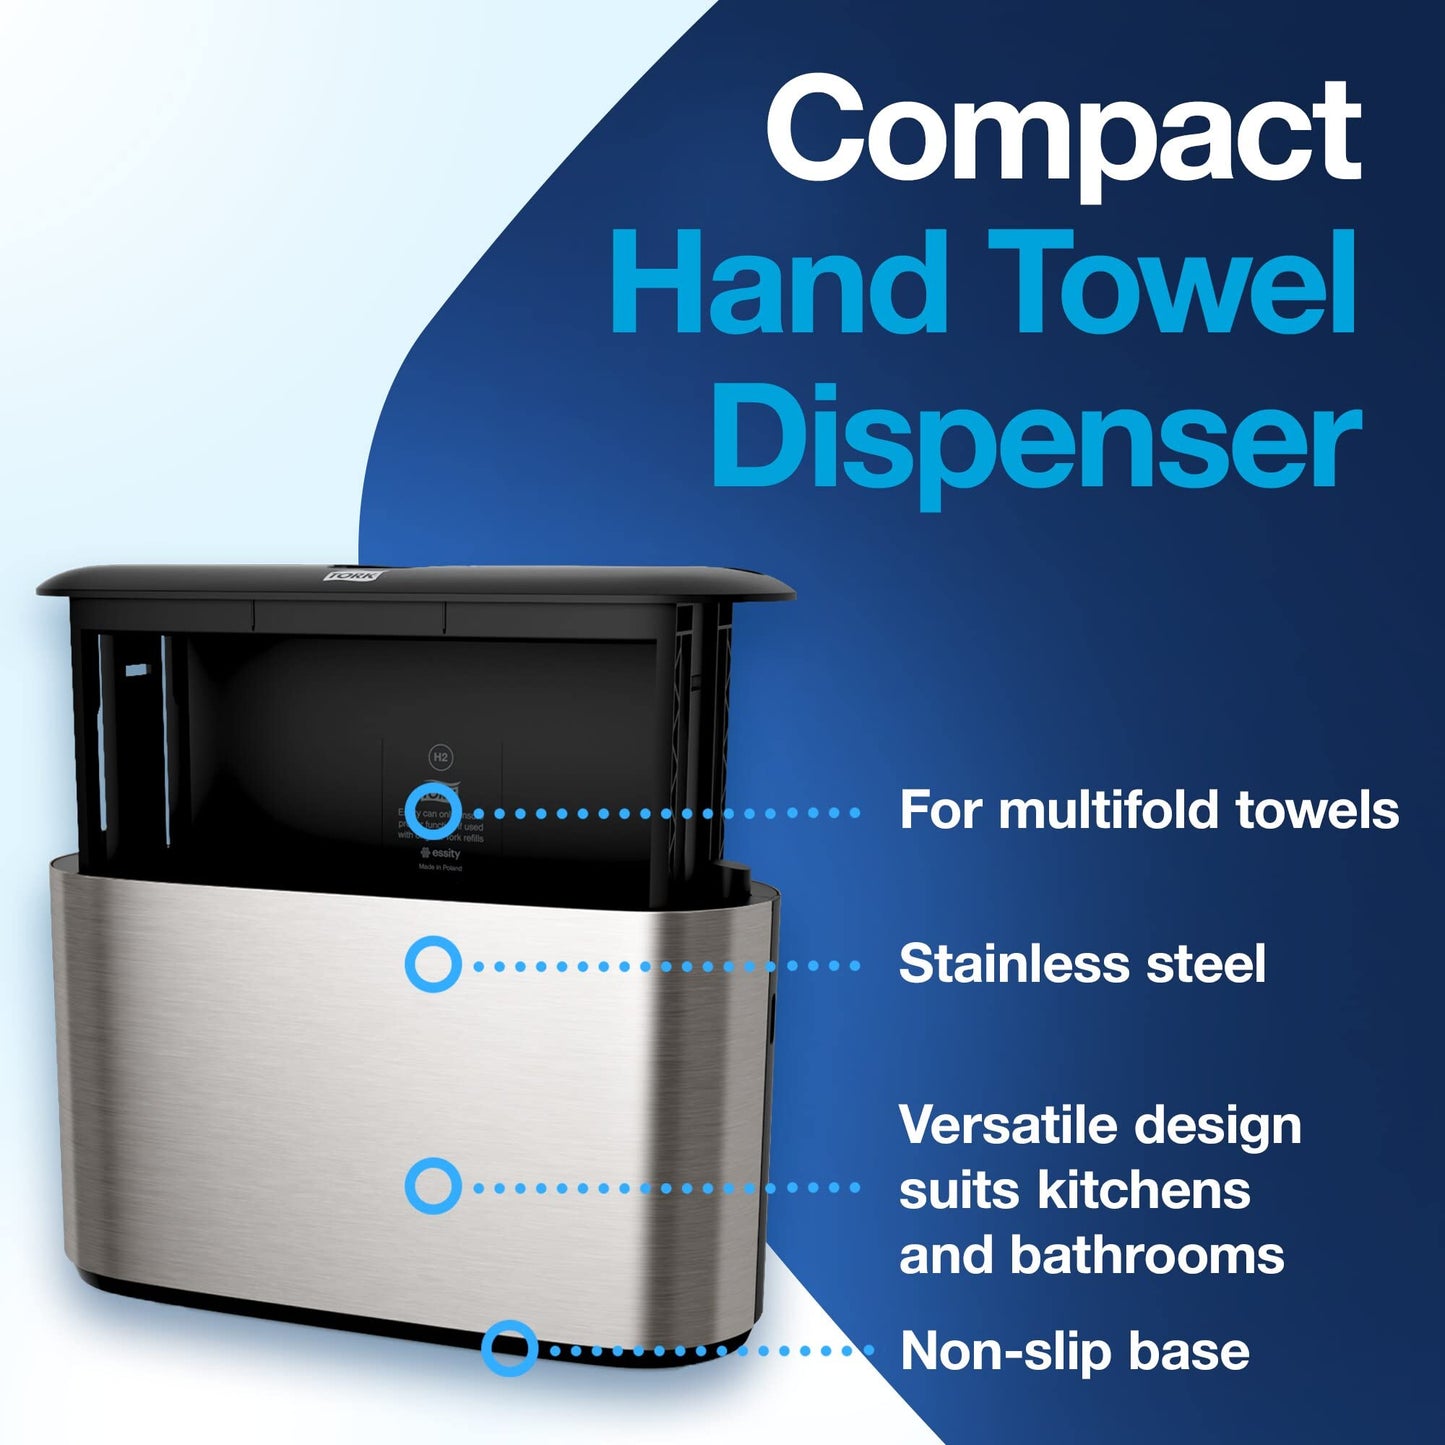 Tork Xpress Paper Towel Dispenser, Stainless Steel, Compact for Home Use, Fits H2 Hand Towels